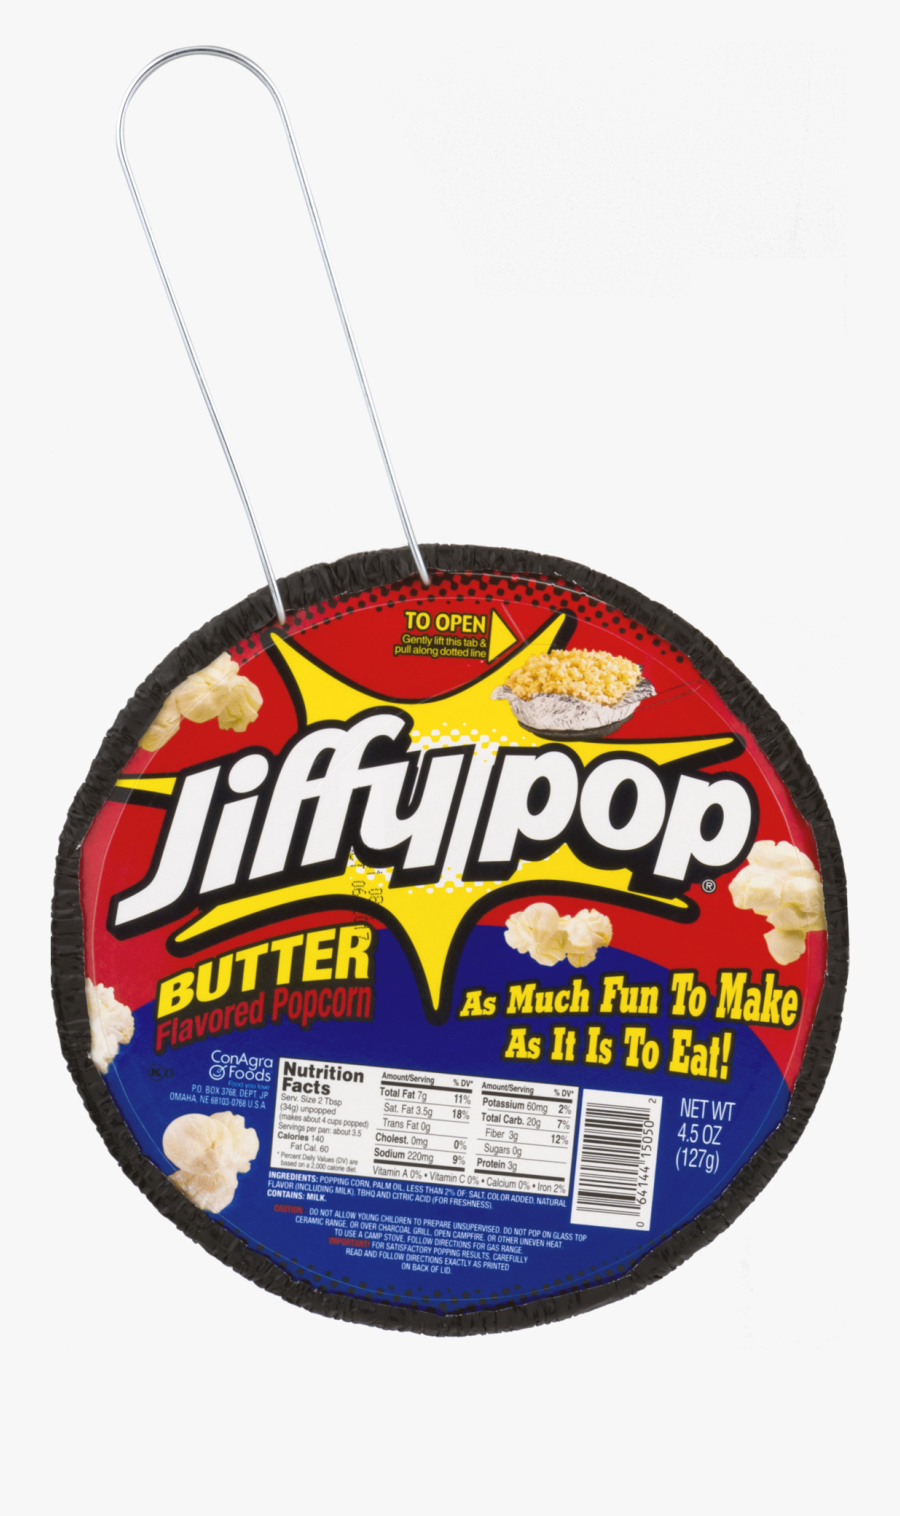 Jiffy Pop Butter Flavored Popcorn, Clipart , Png Download - Circle, Transparent Clipart